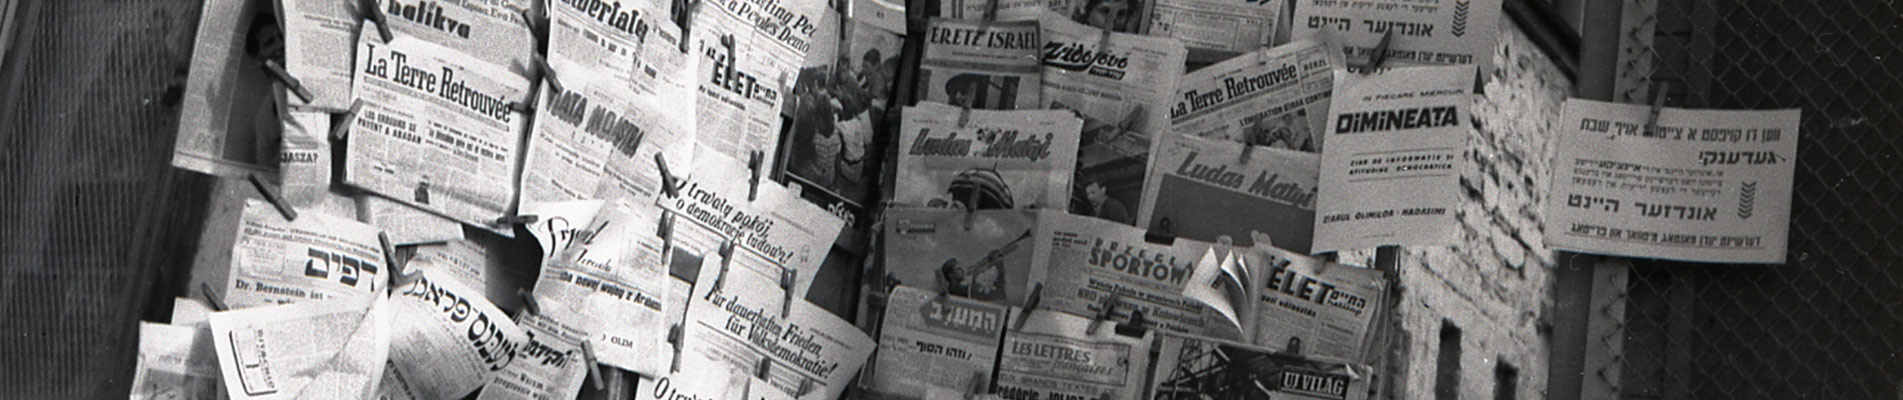 Daily Newspapers